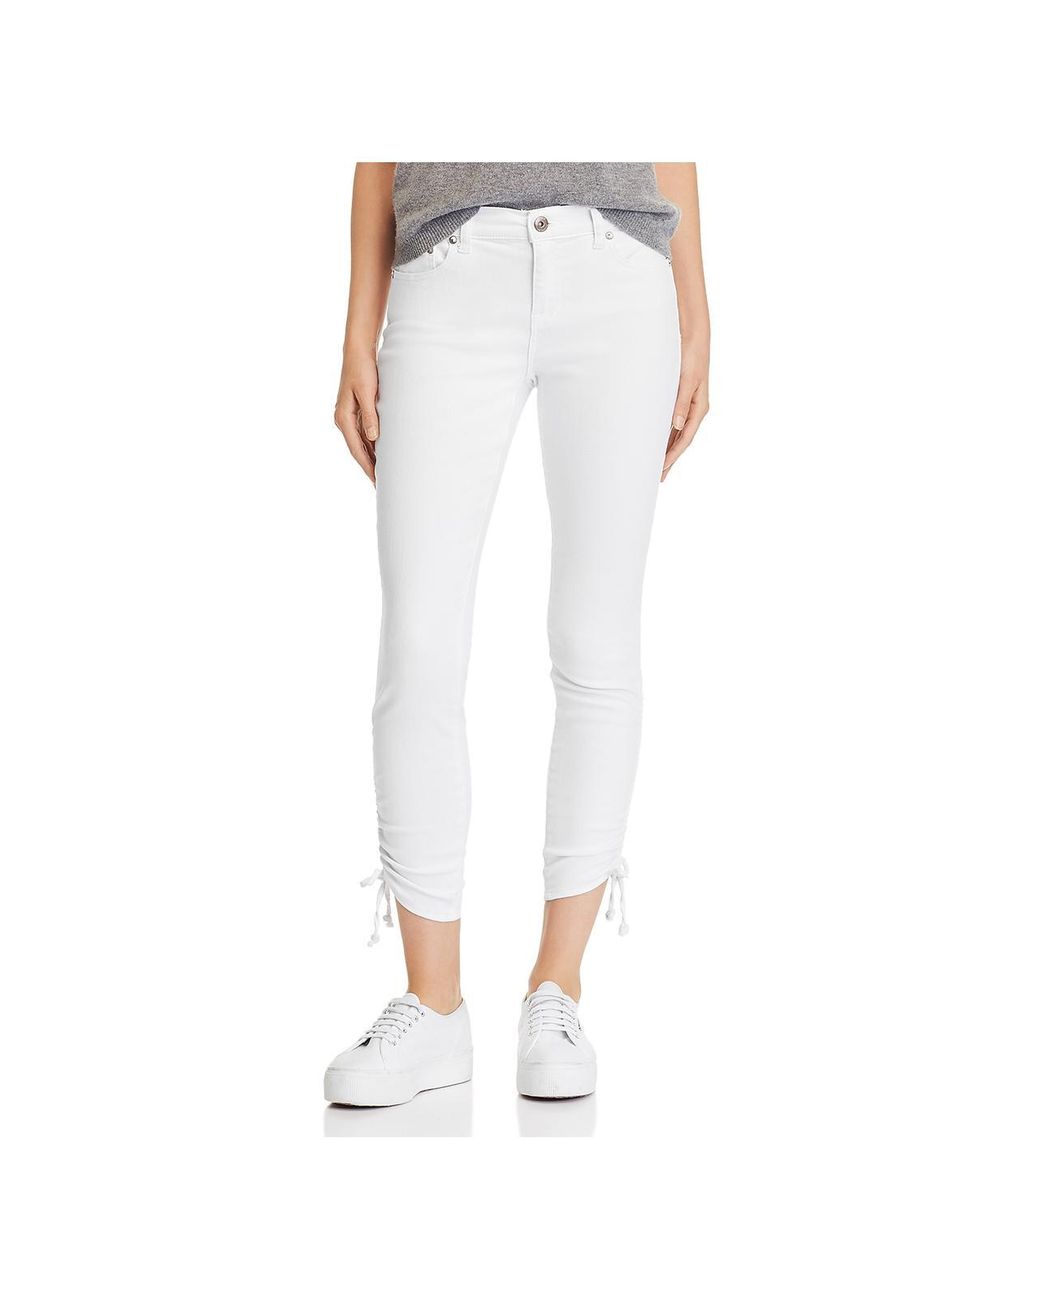 Pistola Audrey Denim Ruched Skinny Jeans in White | Lyst